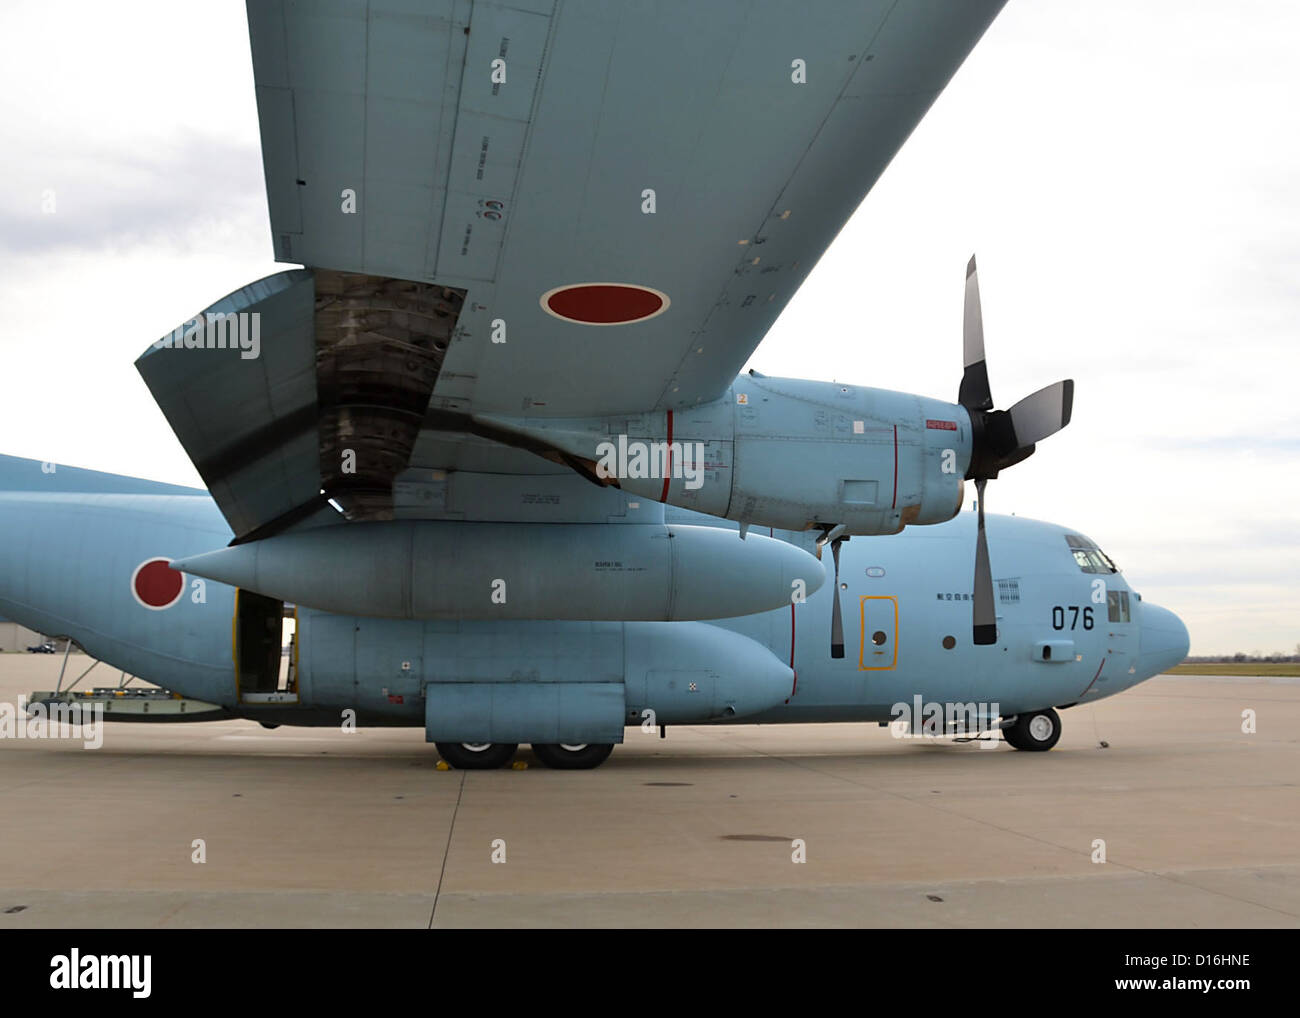 A C-130 aircraft from Japans 401st Tactical Airlift Squadron Stock Photo